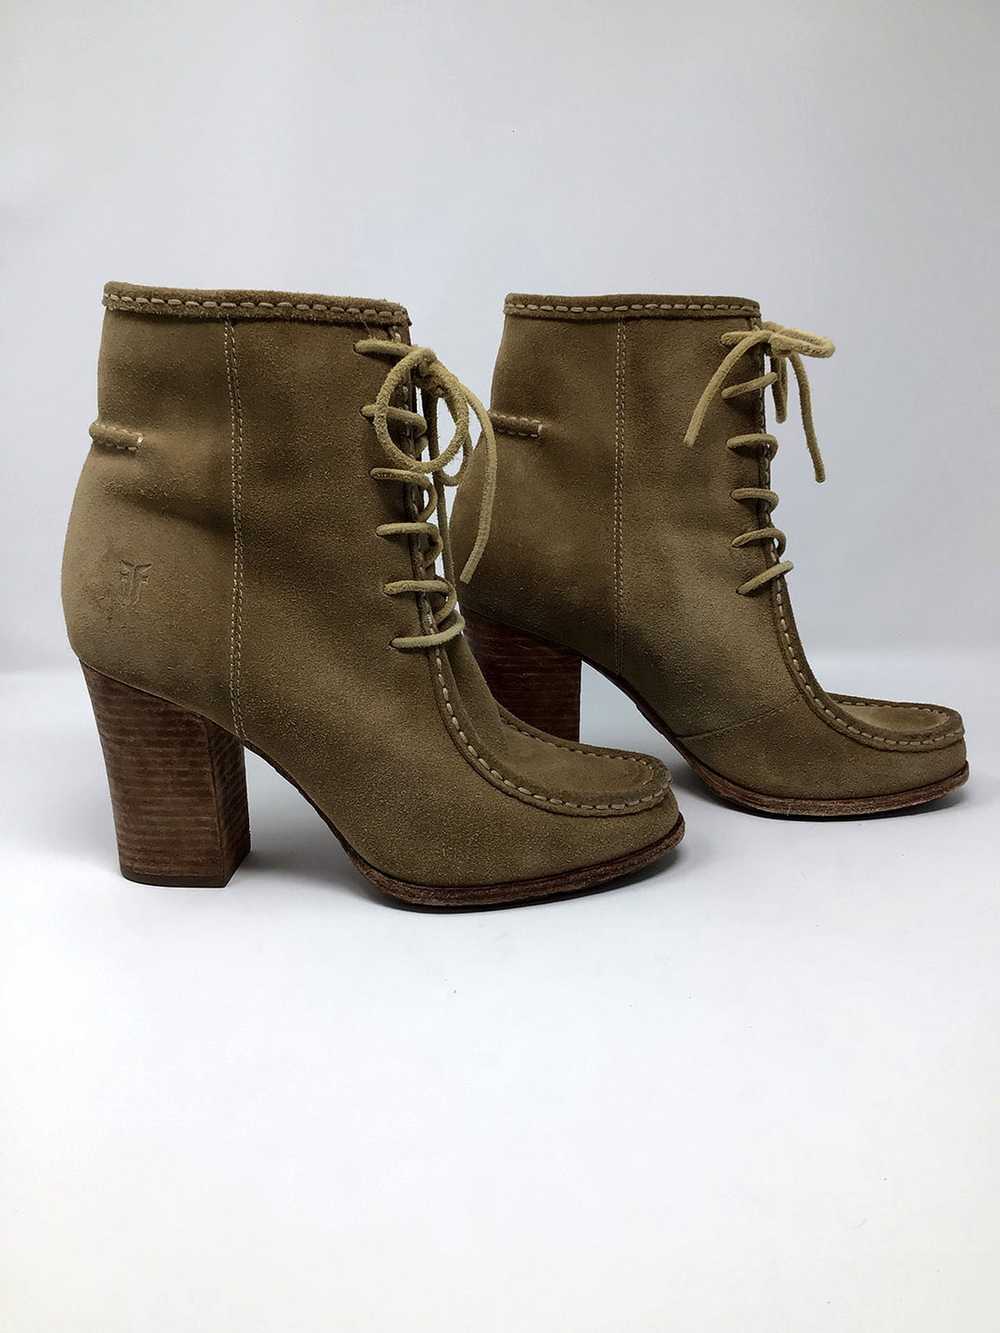 Frye Size 8.5 Light Brown Suede Ankle Boots - image 1